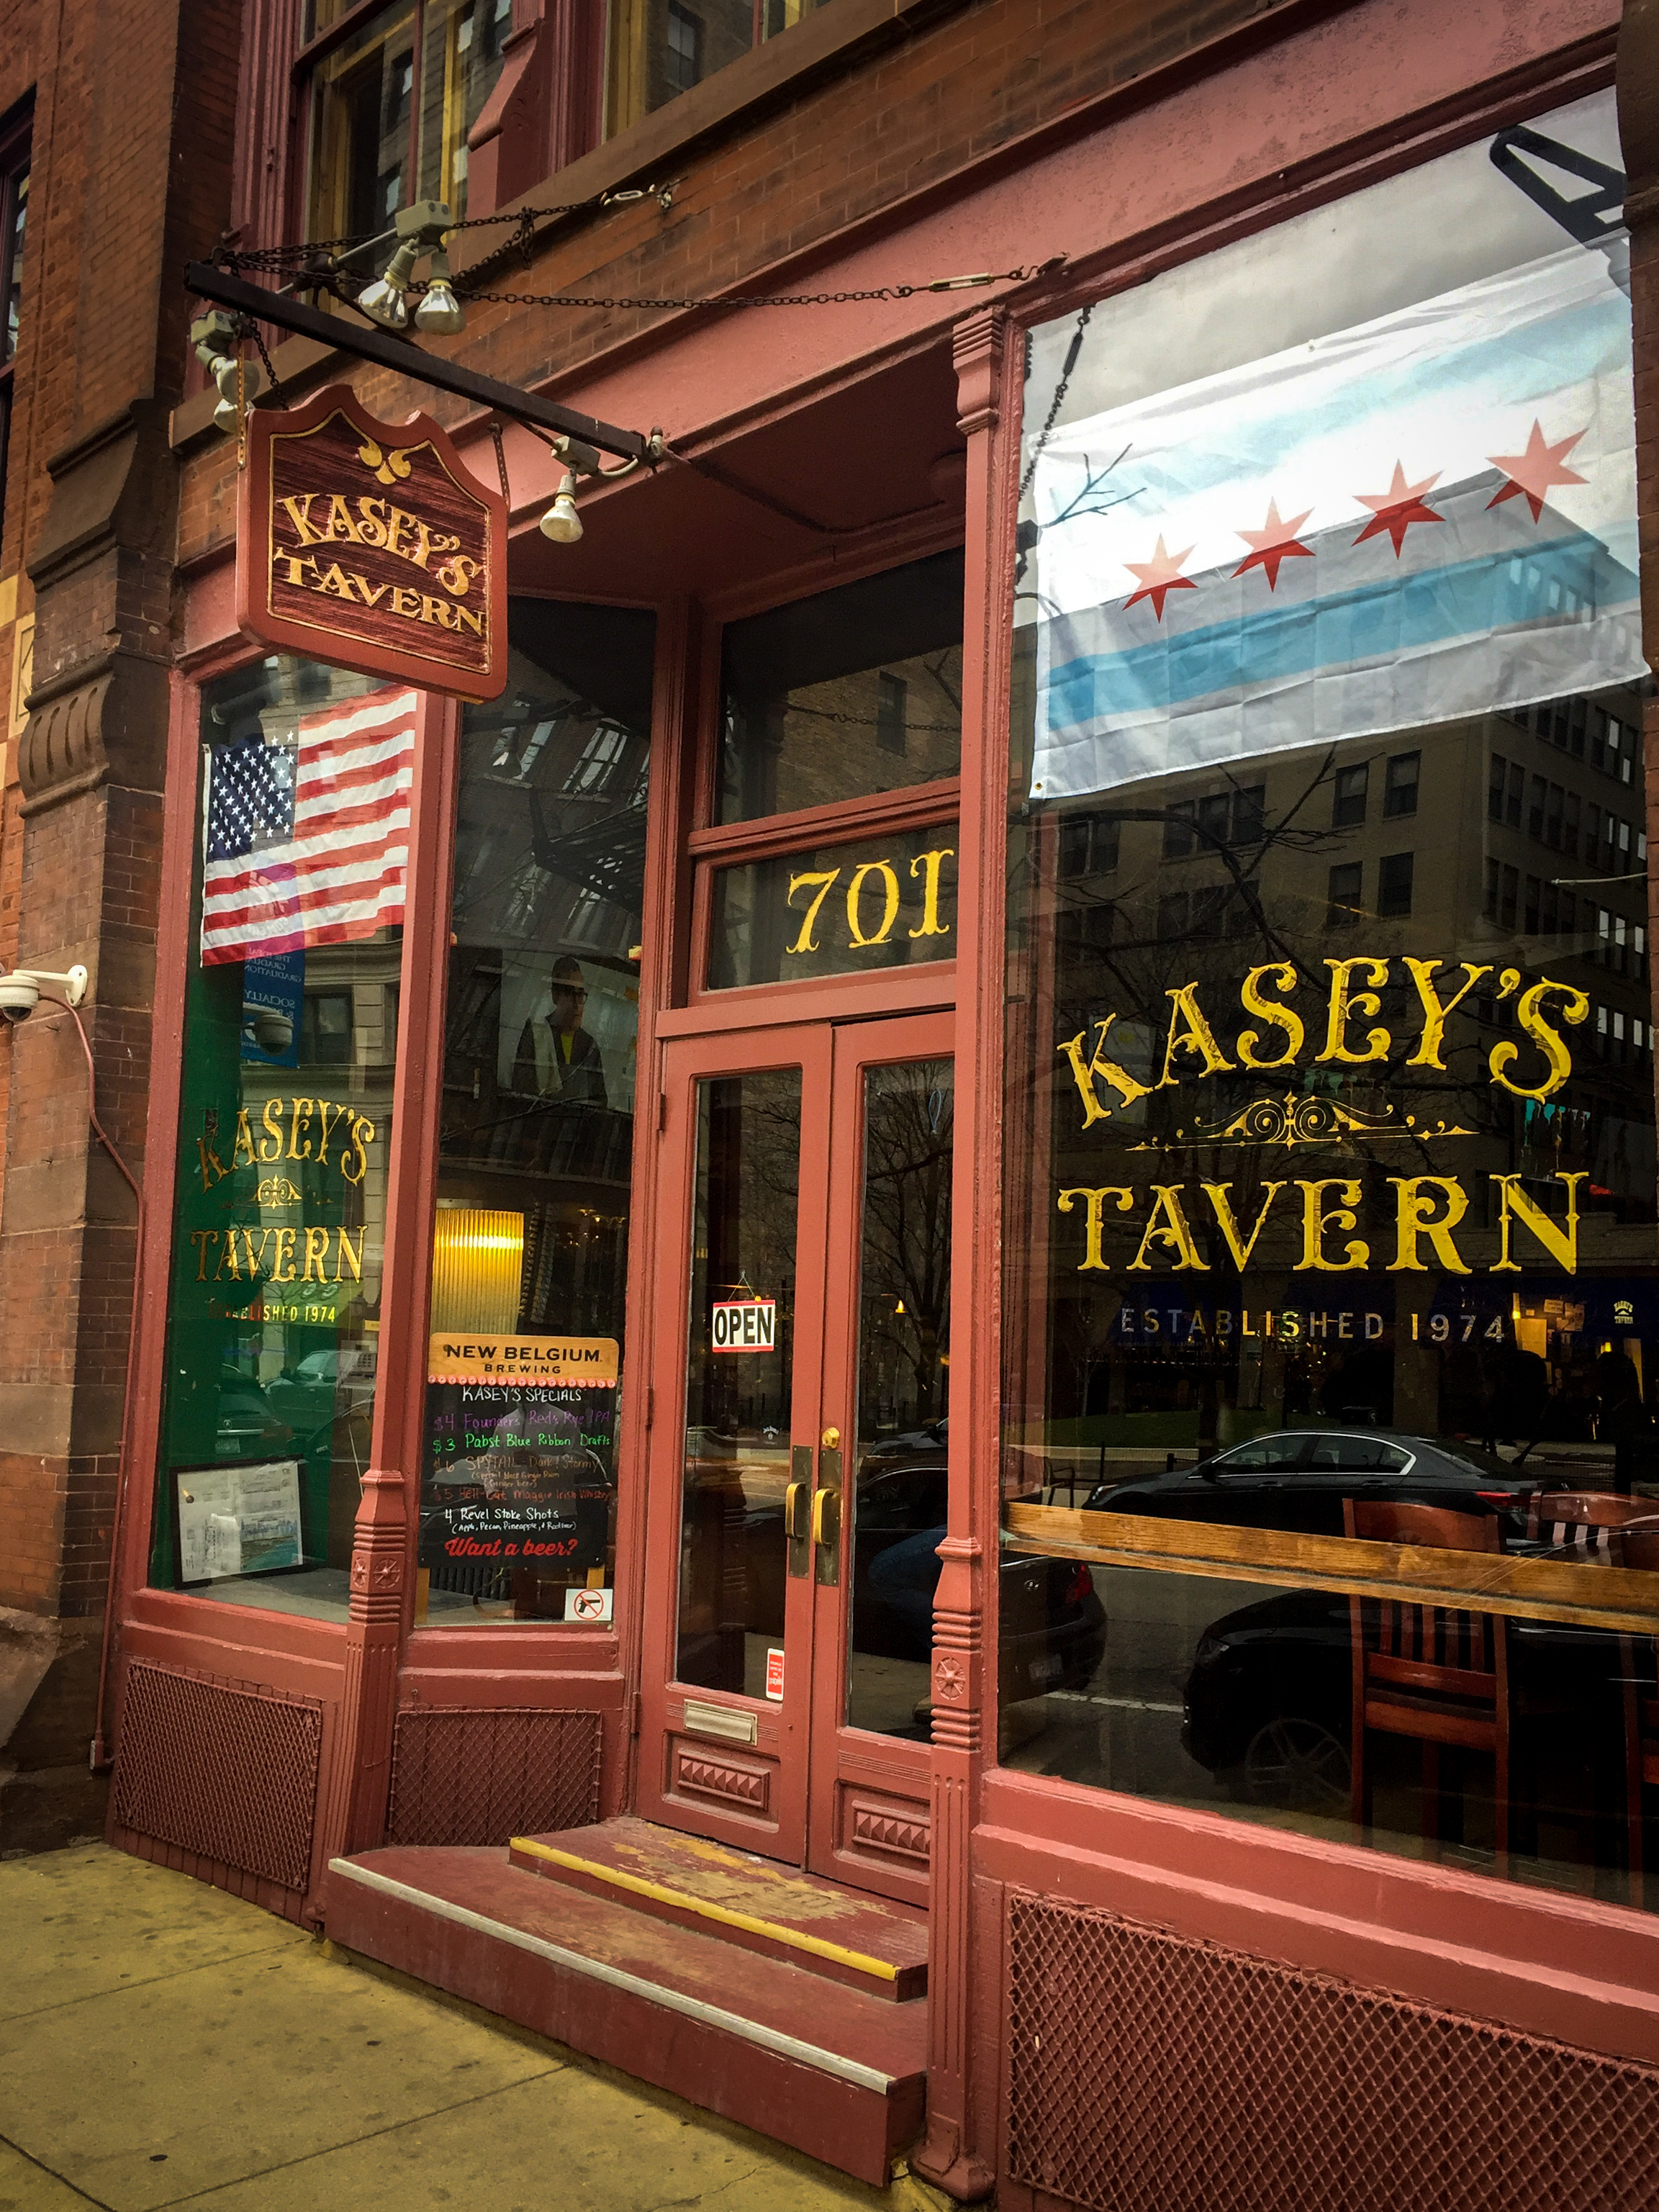 Kasey's Tavern - The Second Oldest Tavern in Chicago